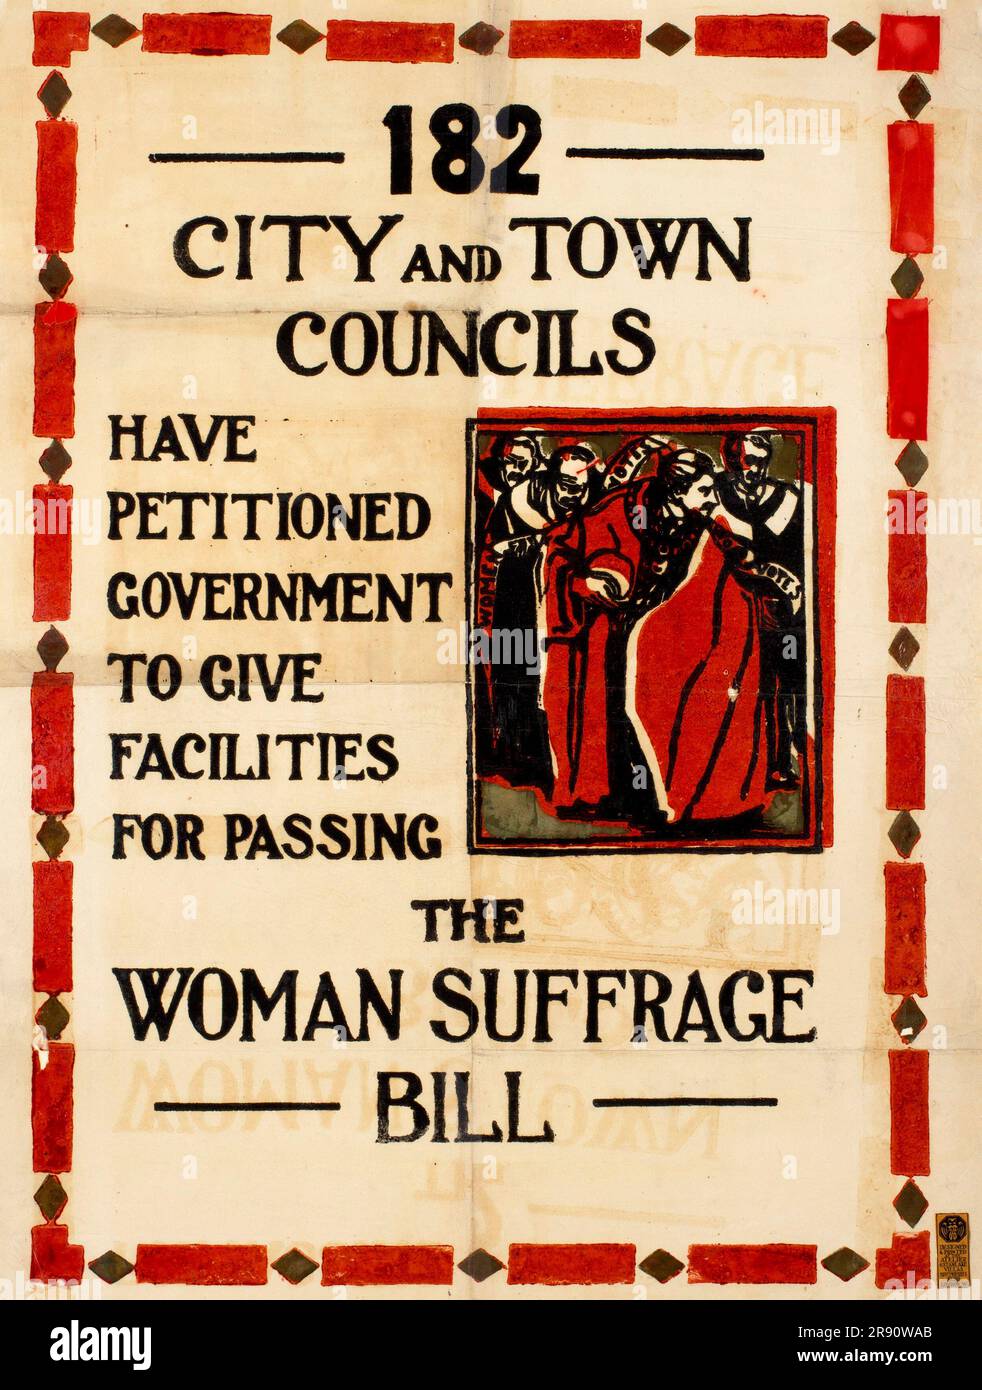 A vintage suffragette campaigning poster with the text 182 City and Town Councils have petitioned the government to give facilities forpassing the Women's suffrage bill. Stock Photo